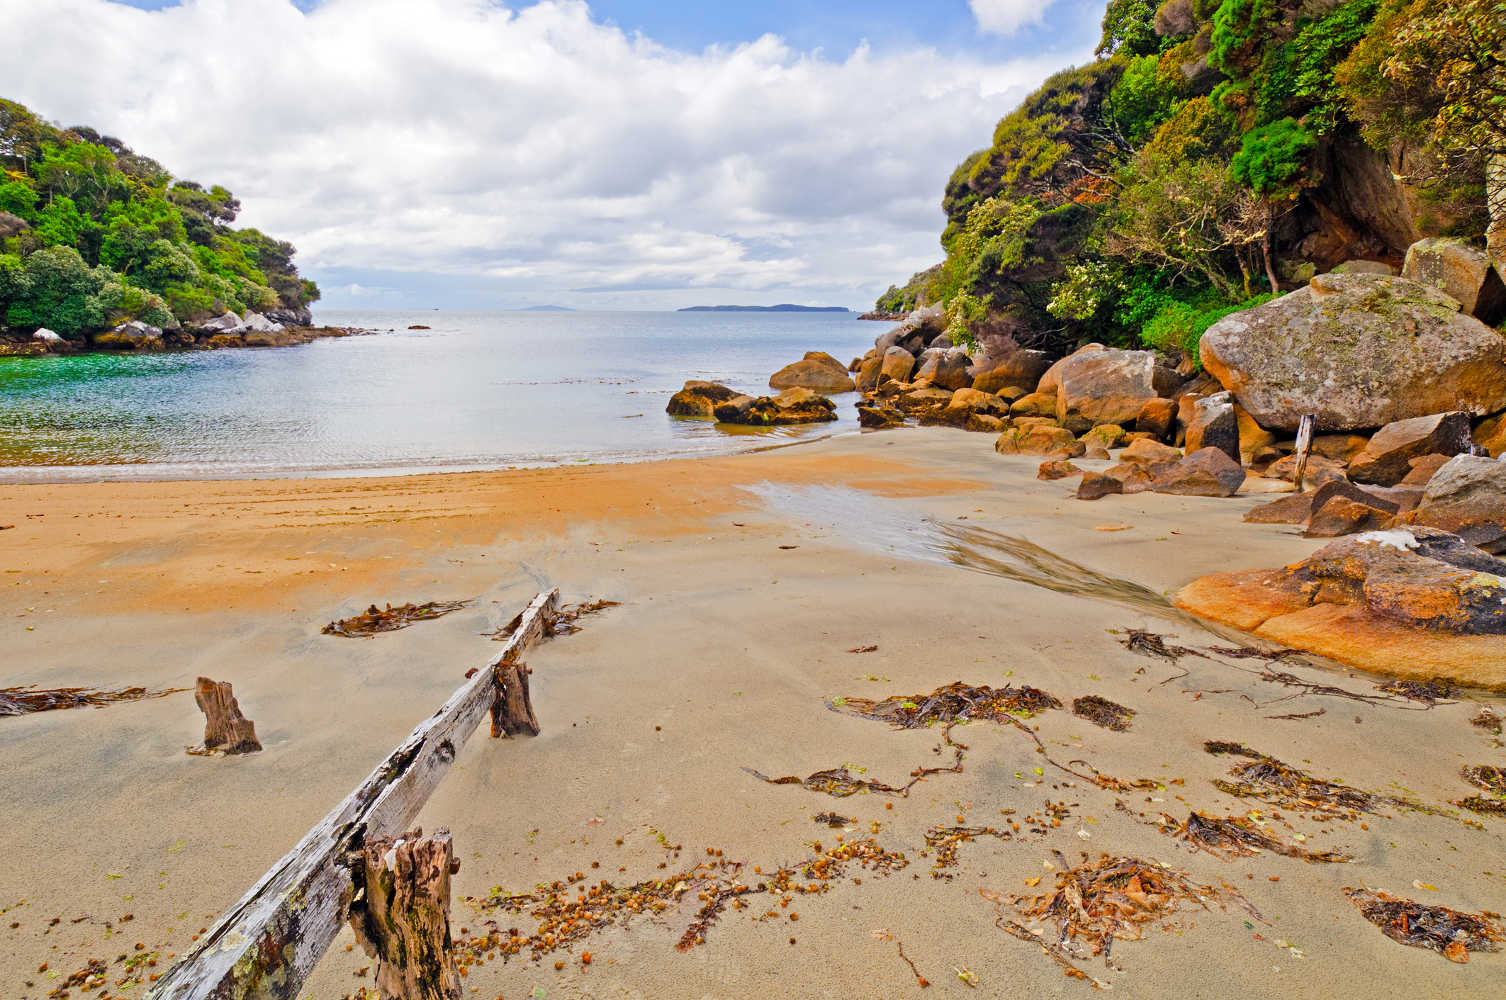 Harrold Bay on the Ackers point trail in New Zealand